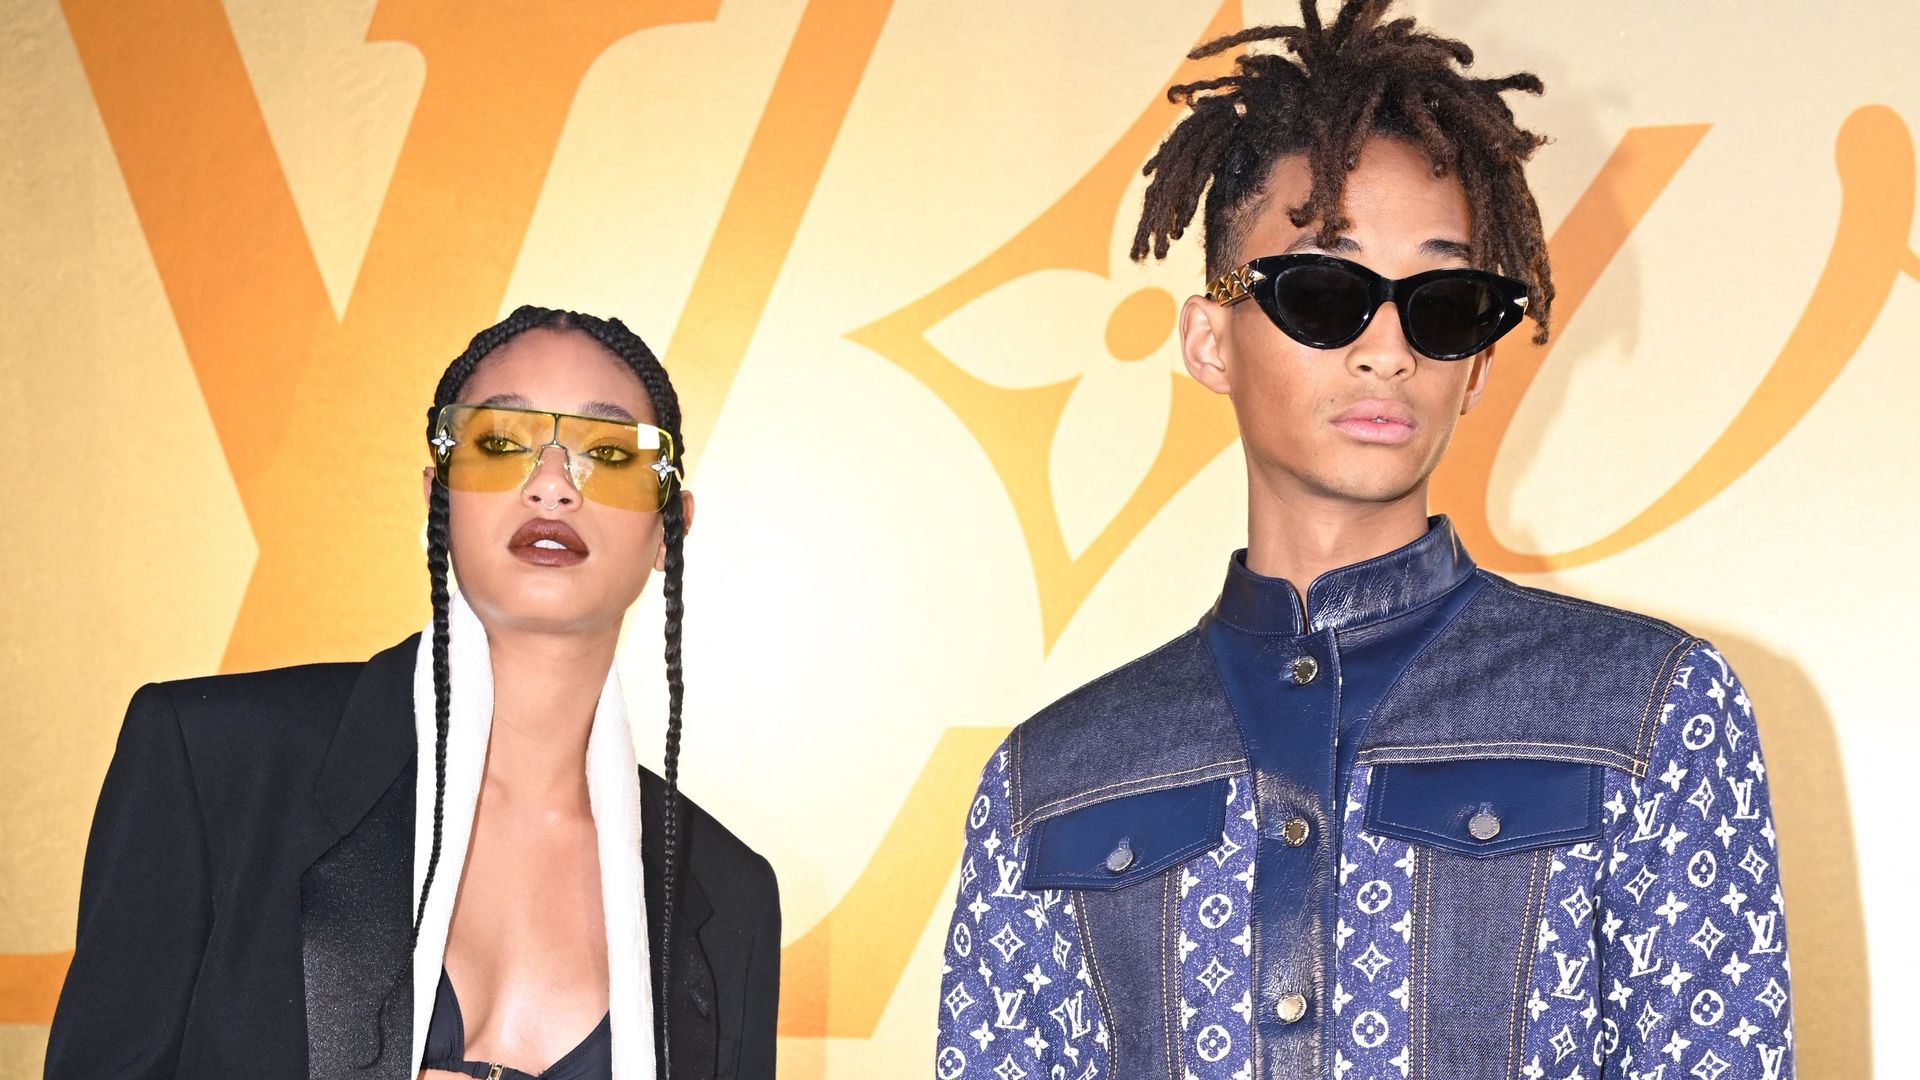 Jada Pinkett-Smith introduced Jaden Smith and the rest of the